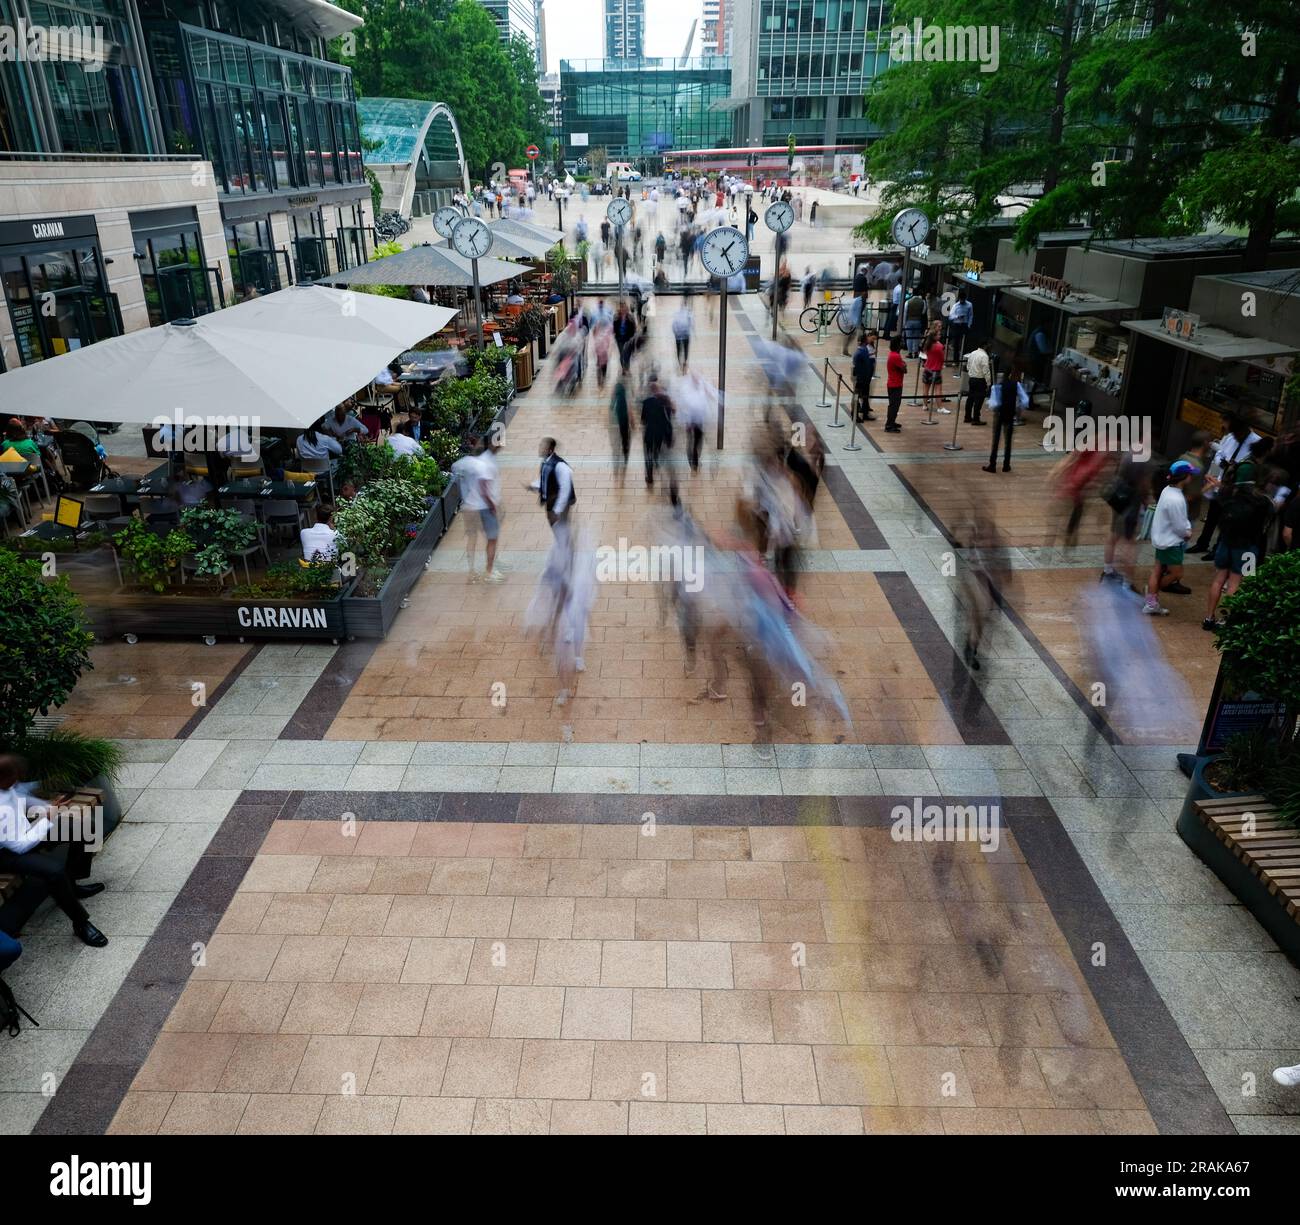 London- June 2023: Motion blurred business people in Reuters Plaza, London's Canary Wharf financial district. Stock Photo